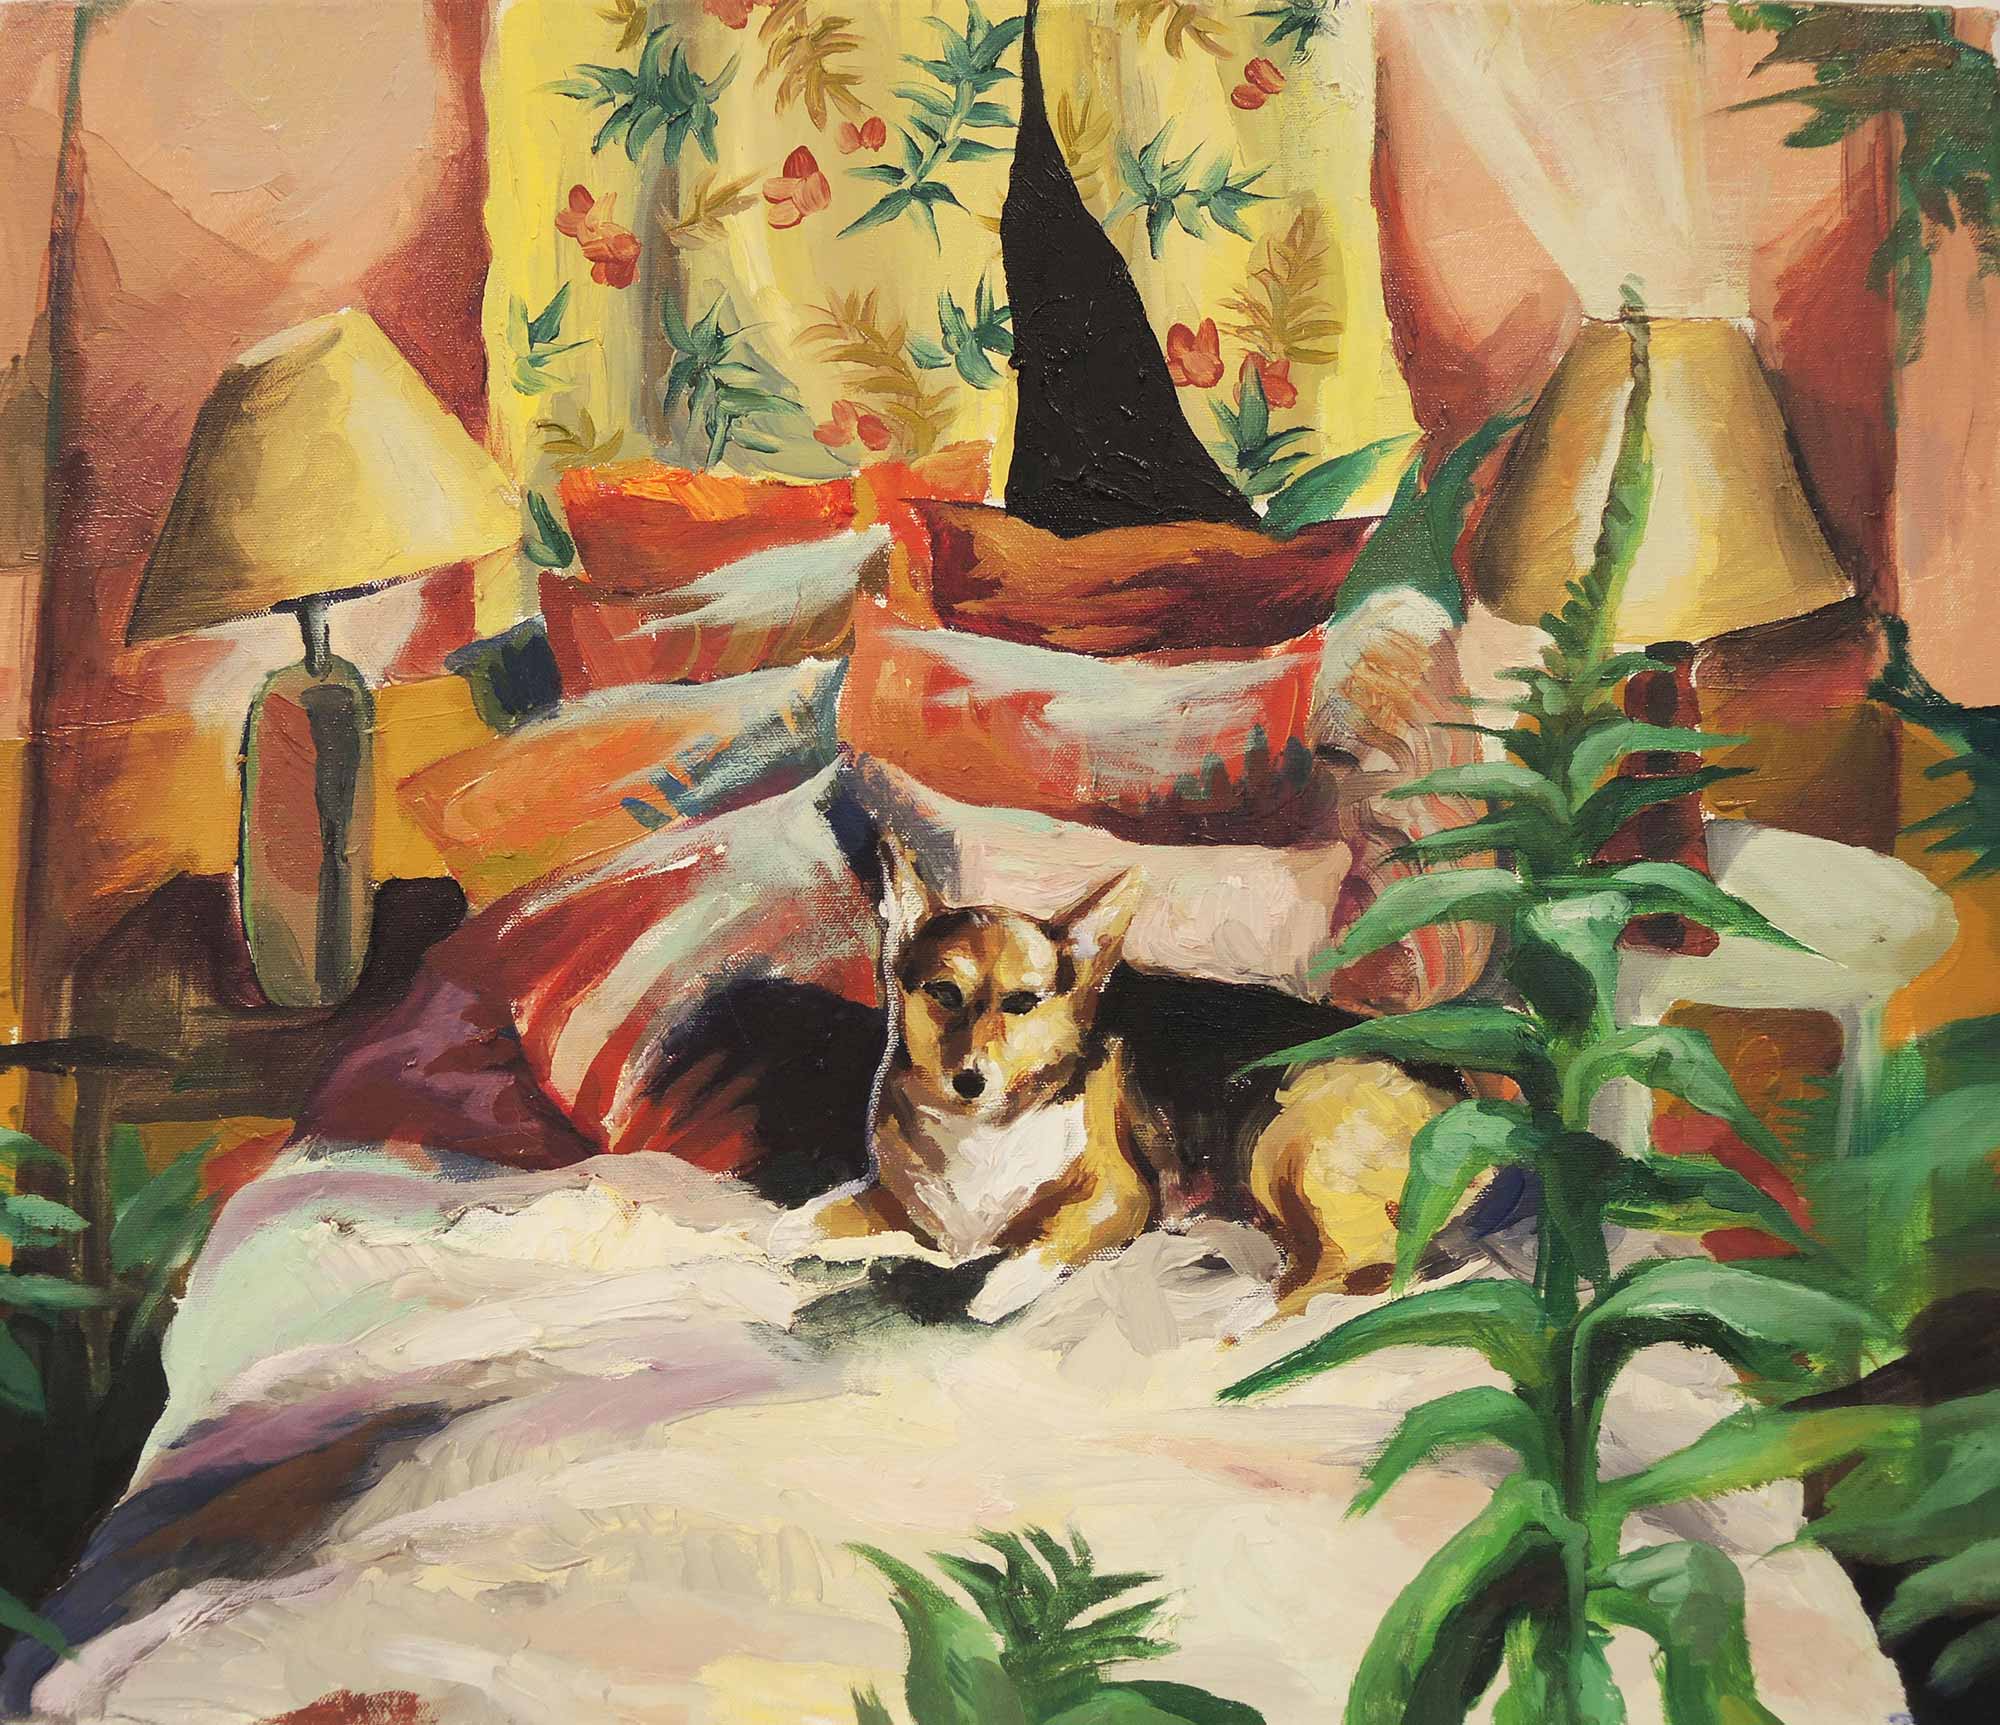 A painting by Oonagh Carroll Warhola of a dog laying on a bed